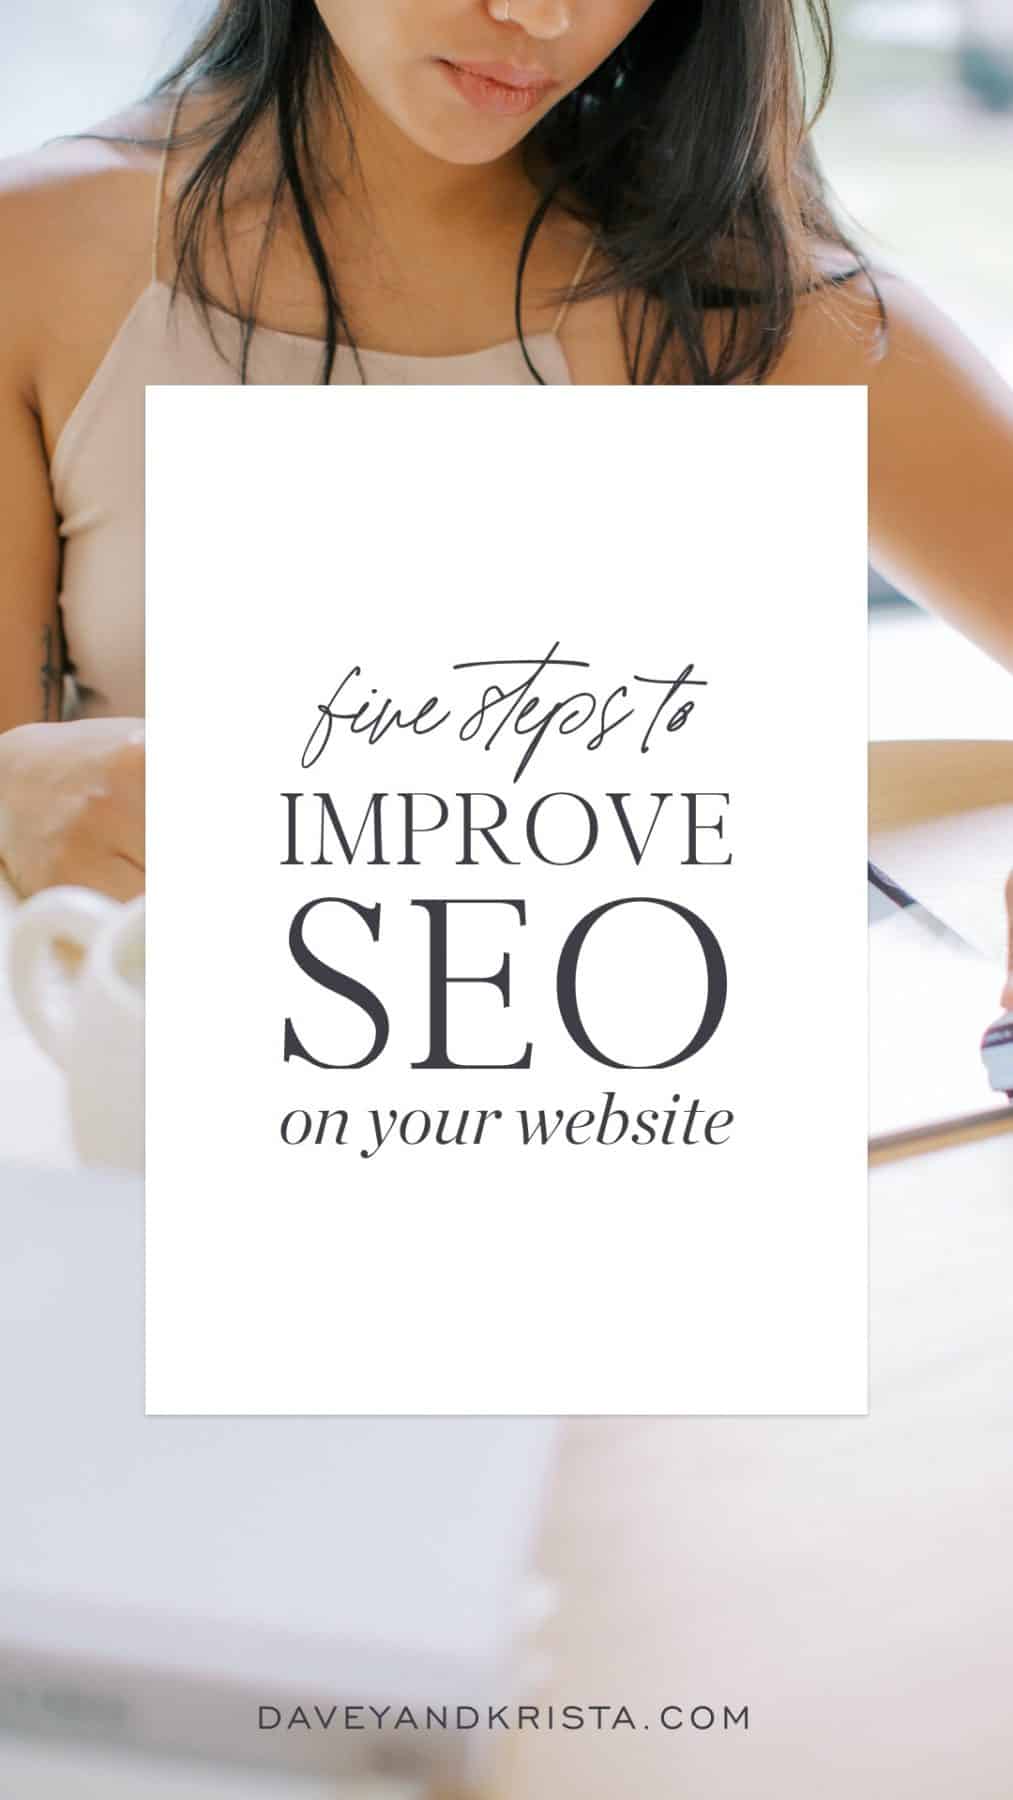 5 Steps to Improve SEO on your Website